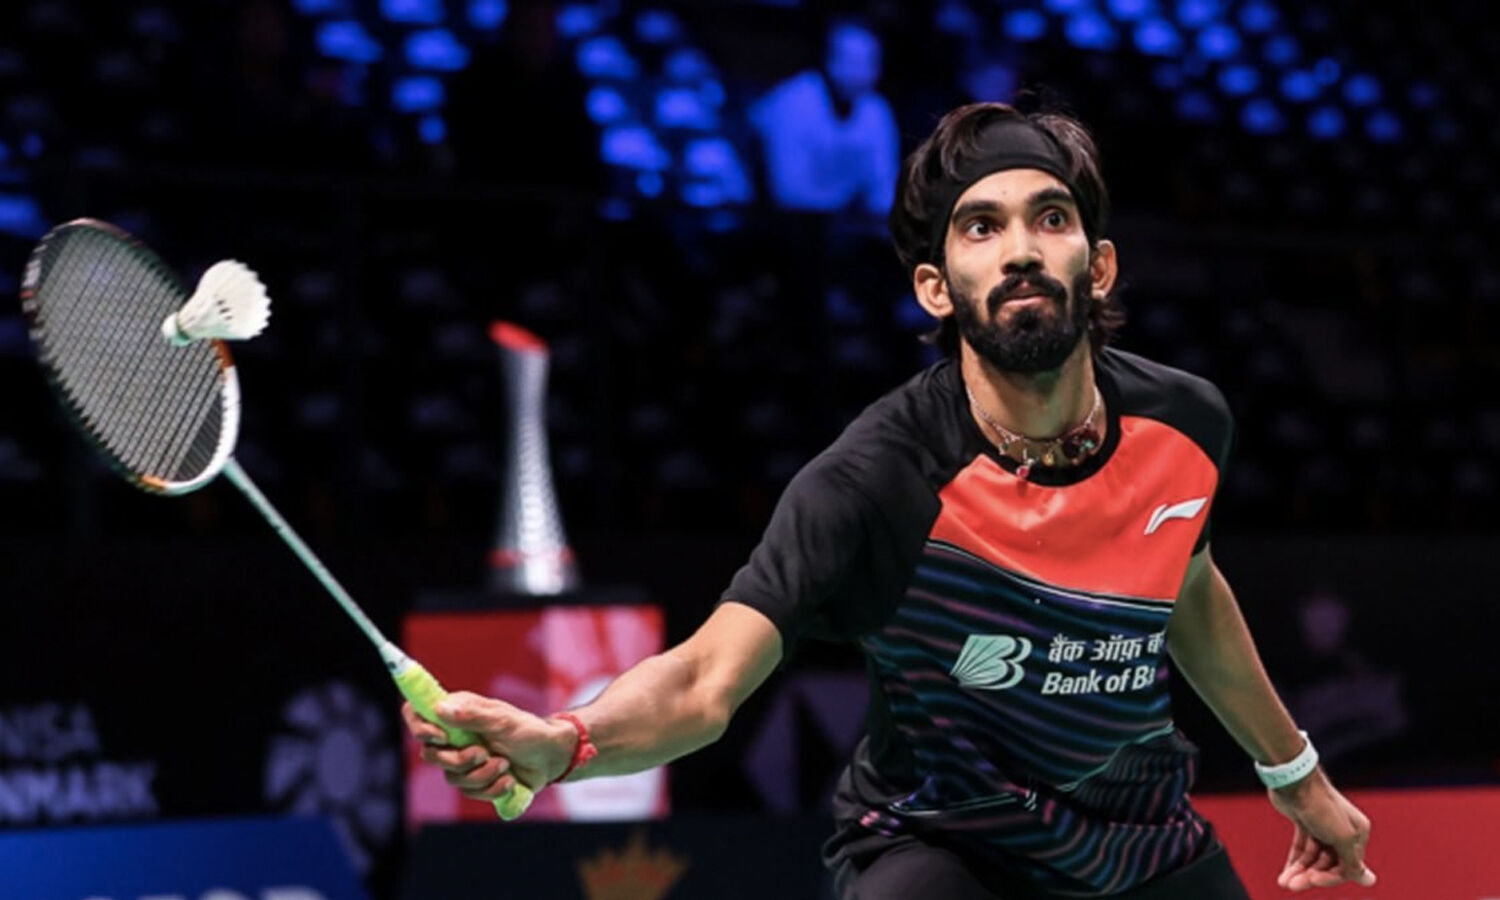 Indonesia Masters 2021 LIVE, Quarter-finals - Kidambi Srikanth and HS Prannoy face-off